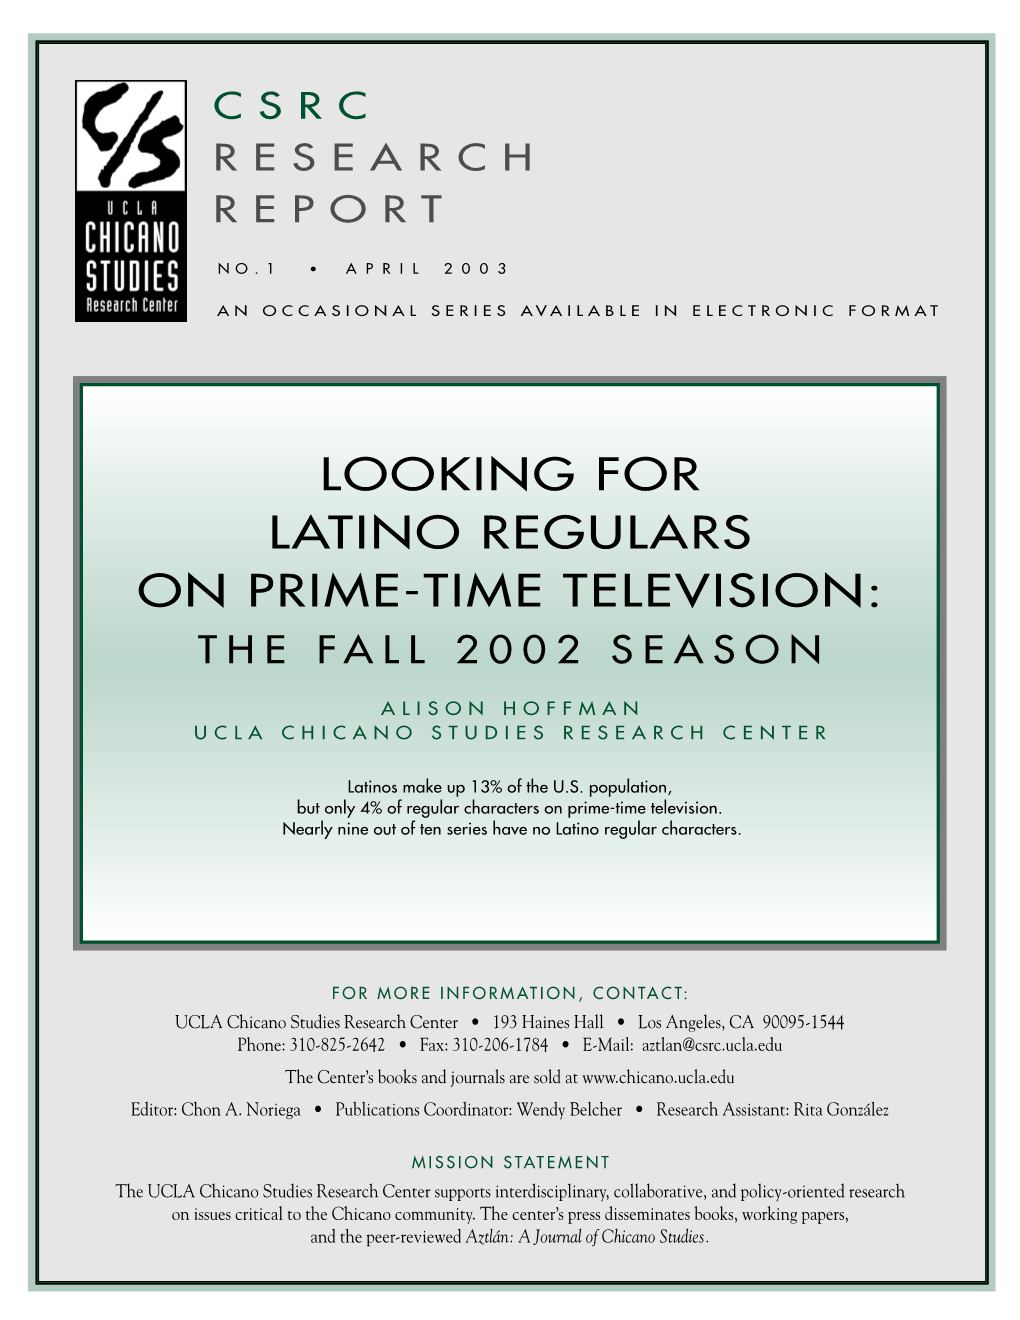 Looking for Latino Regulars on Prime-Time Television: the Fall 2002 Season